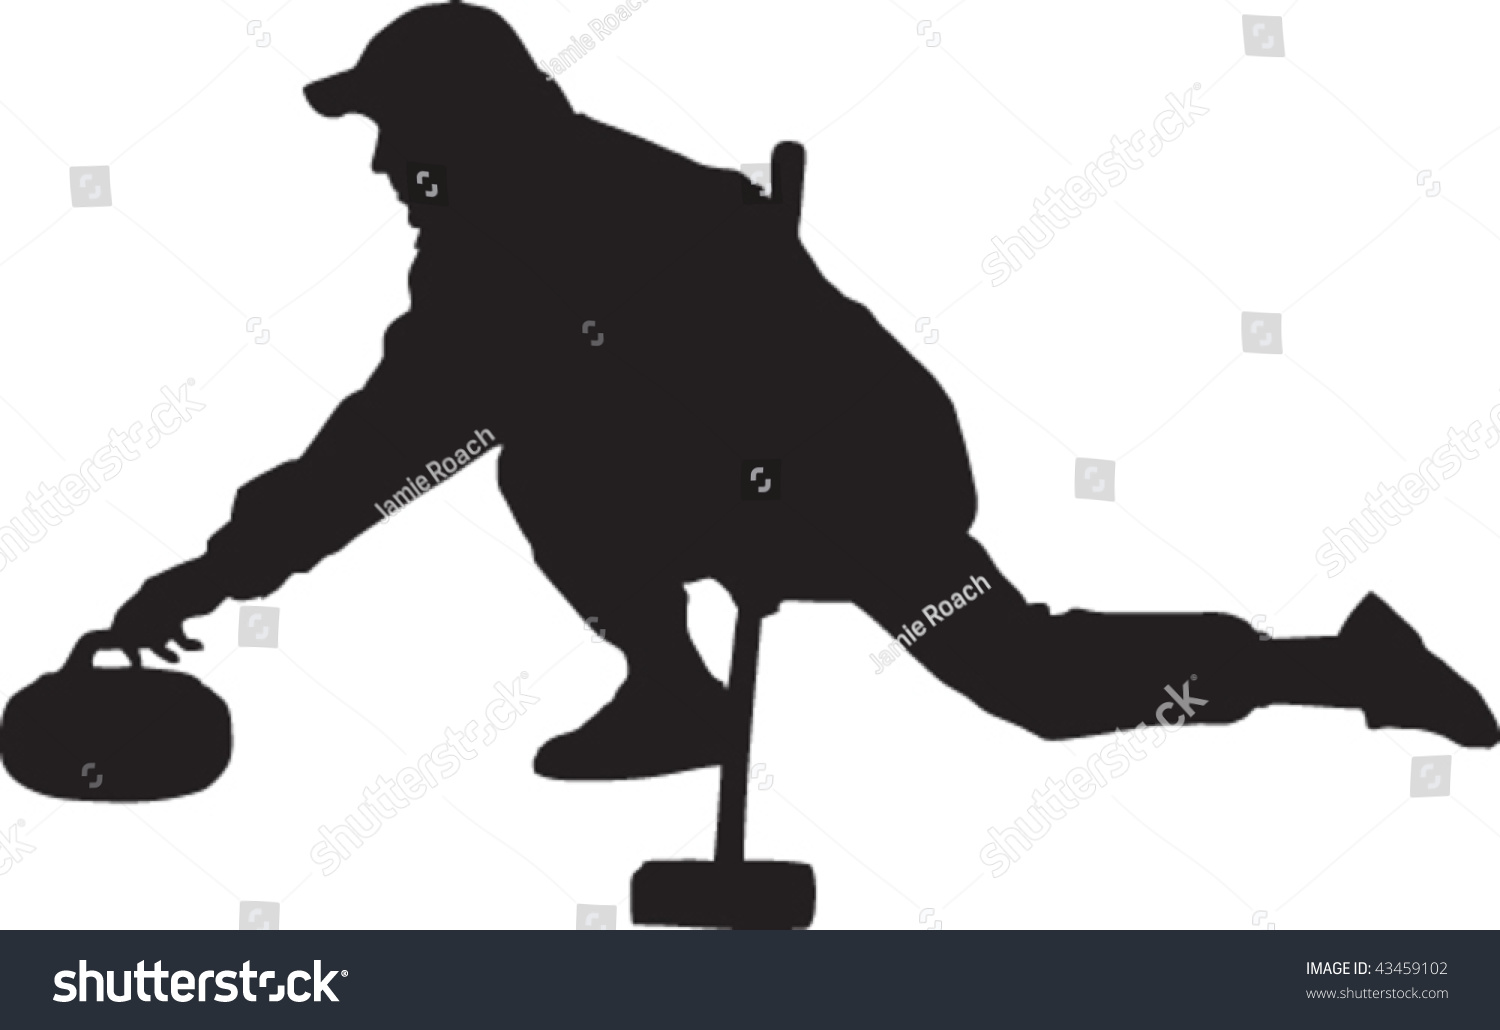 Vector Silhouette Curler Delivering Stone Stock Vector 43459102 ...